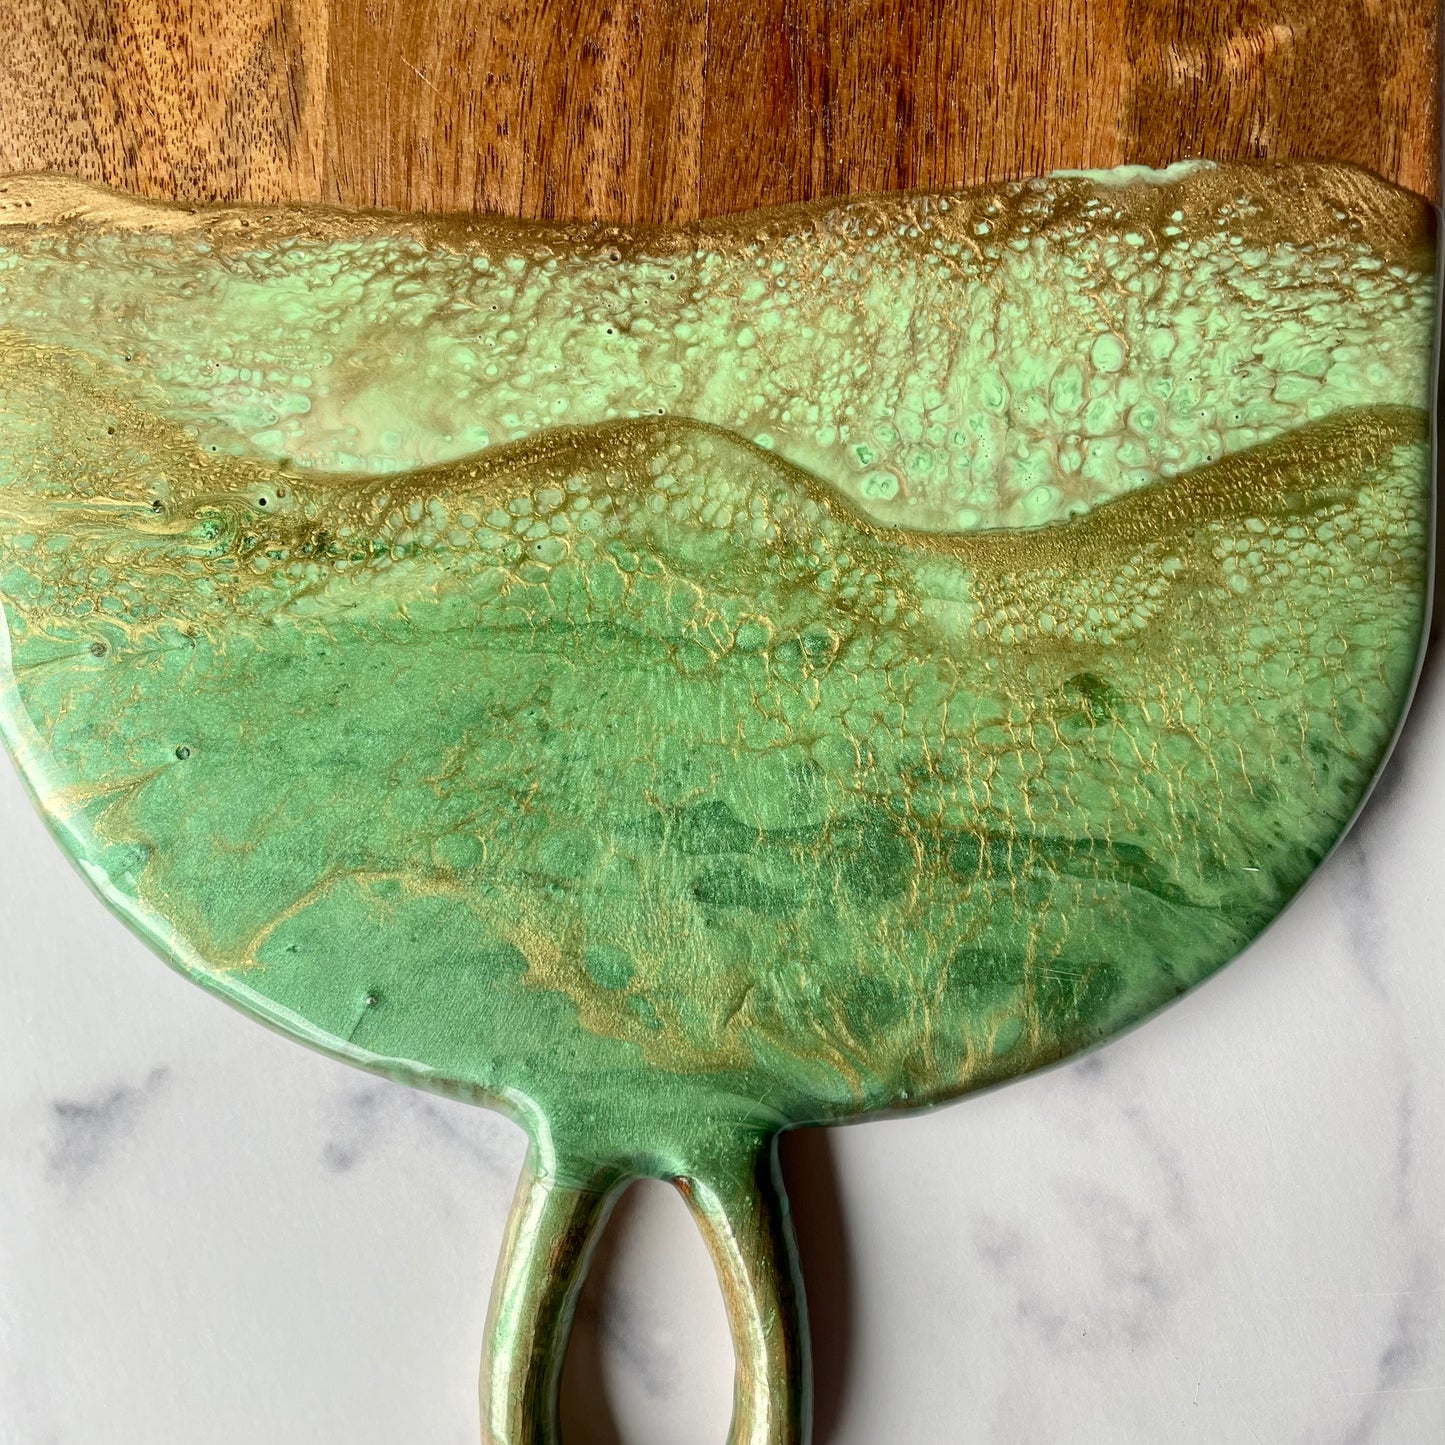 Golden Green Bow Tie Cutting and Serving Board